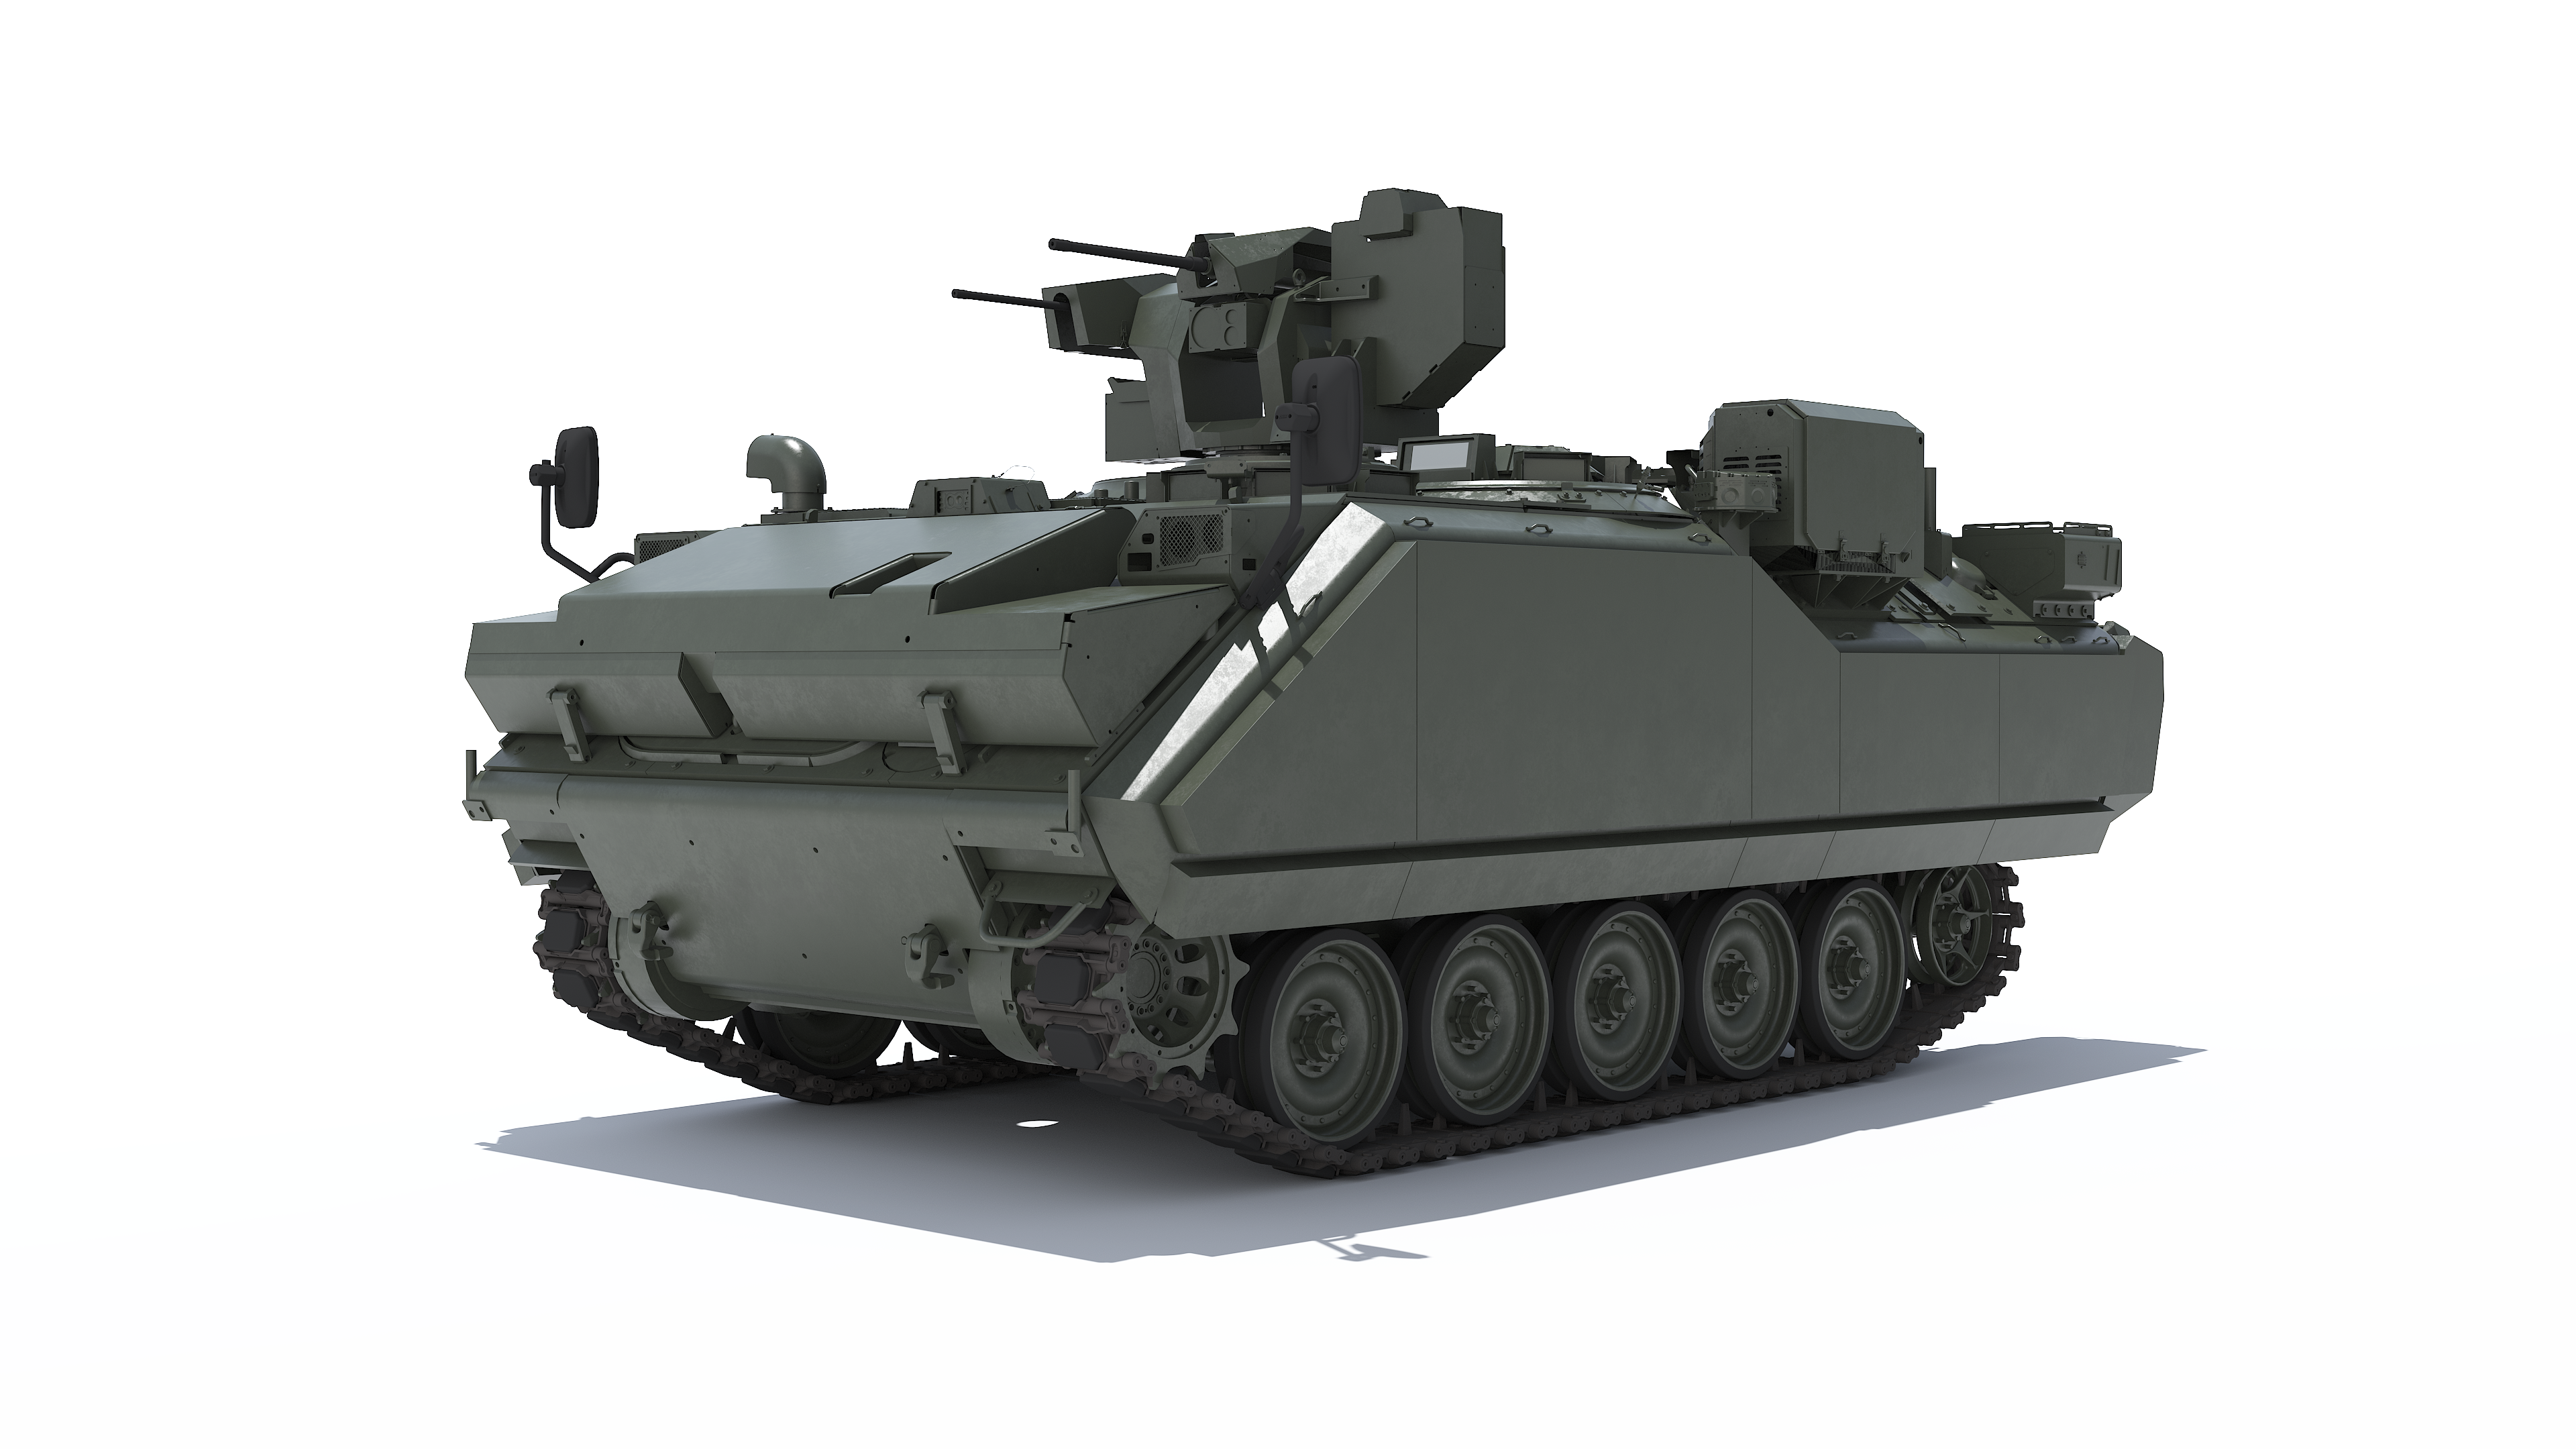 FNSS Initiated ACV-15 AAPC Capability Enhancement & Life Extension Program for the Turkish Land Forces